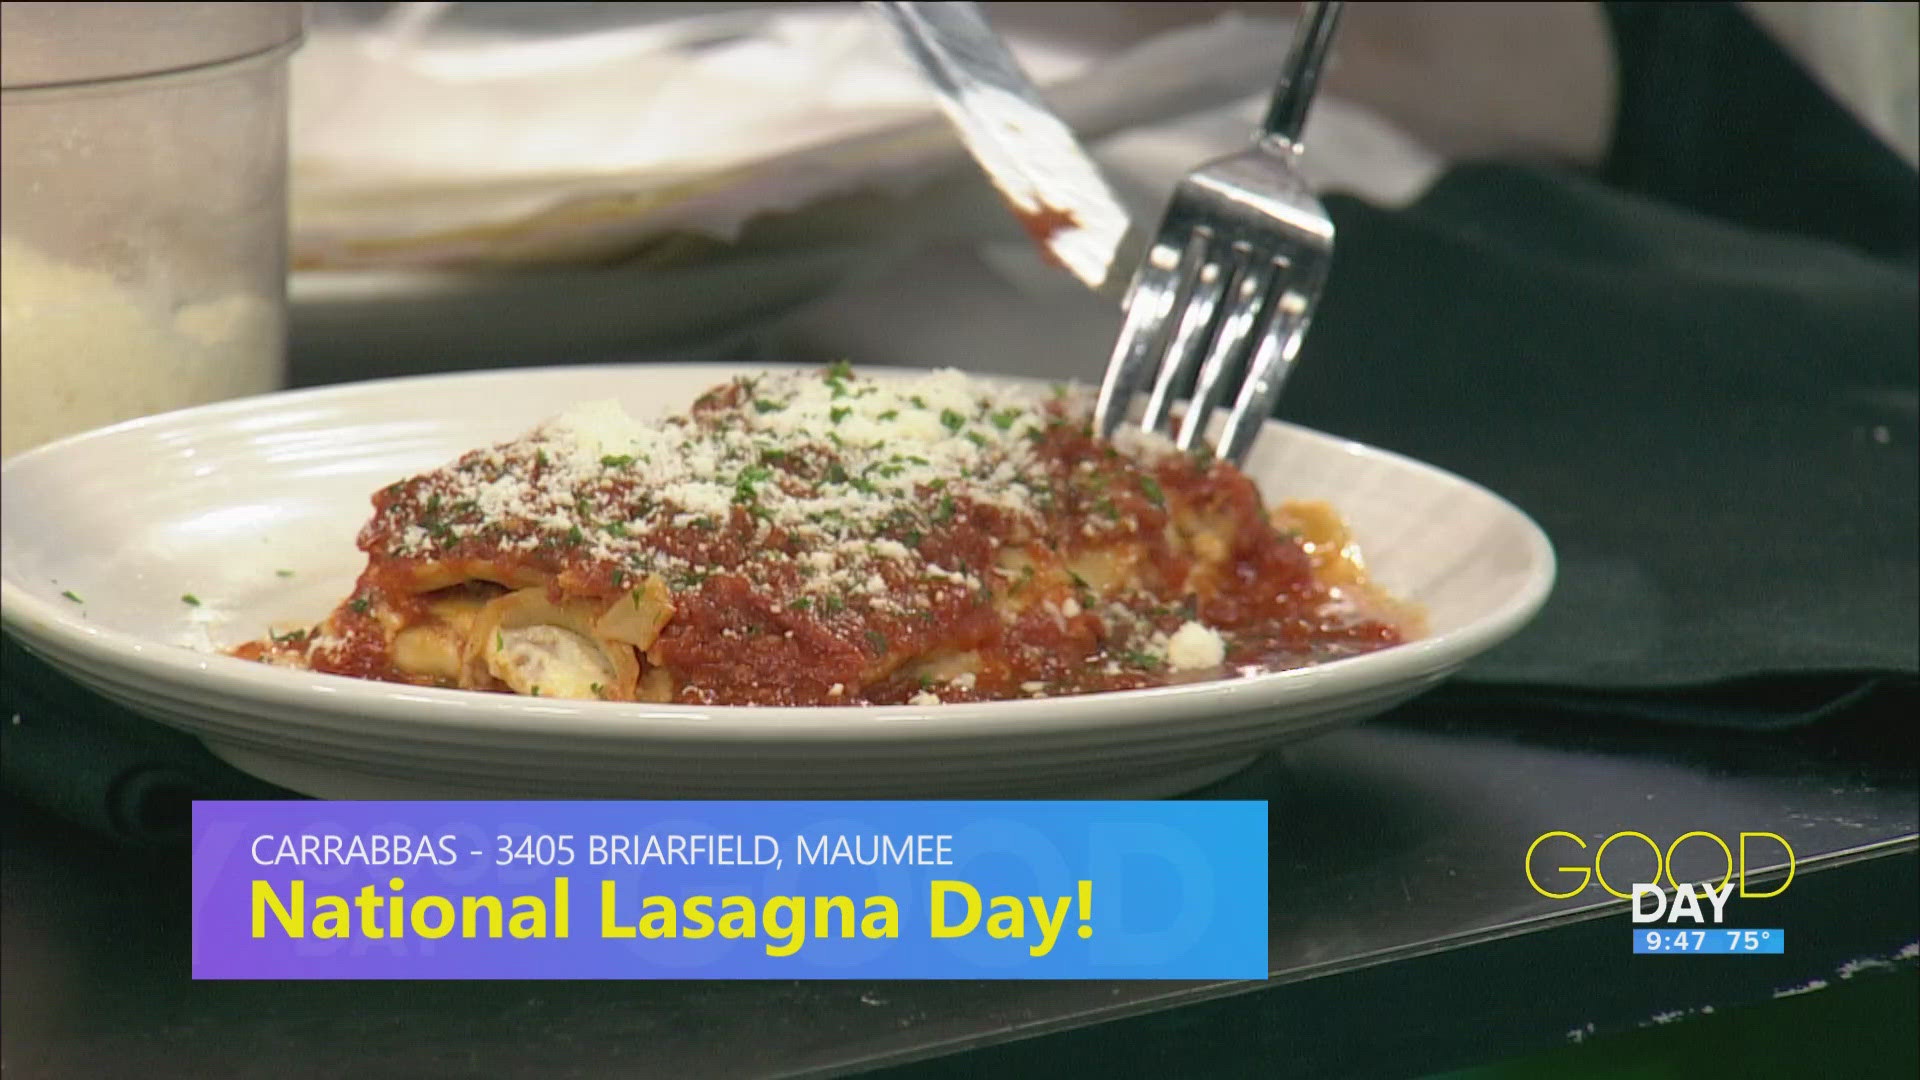 Dennis Torongo from Carrabba's Italian Grill whips up some delicious lasagna.